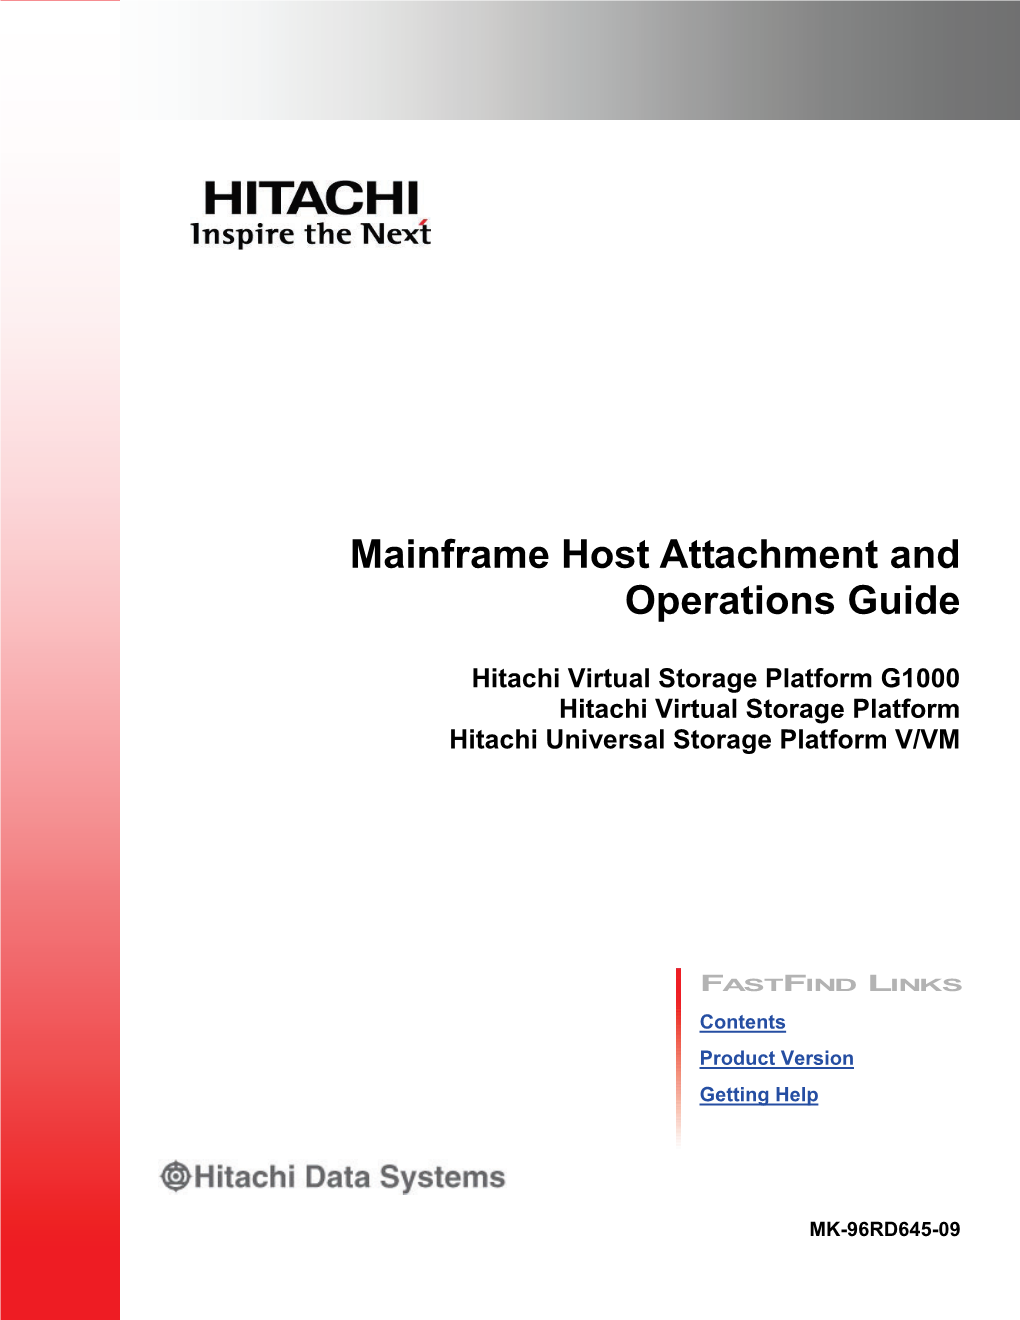 Mainframe Host Attachment and Operations Guide